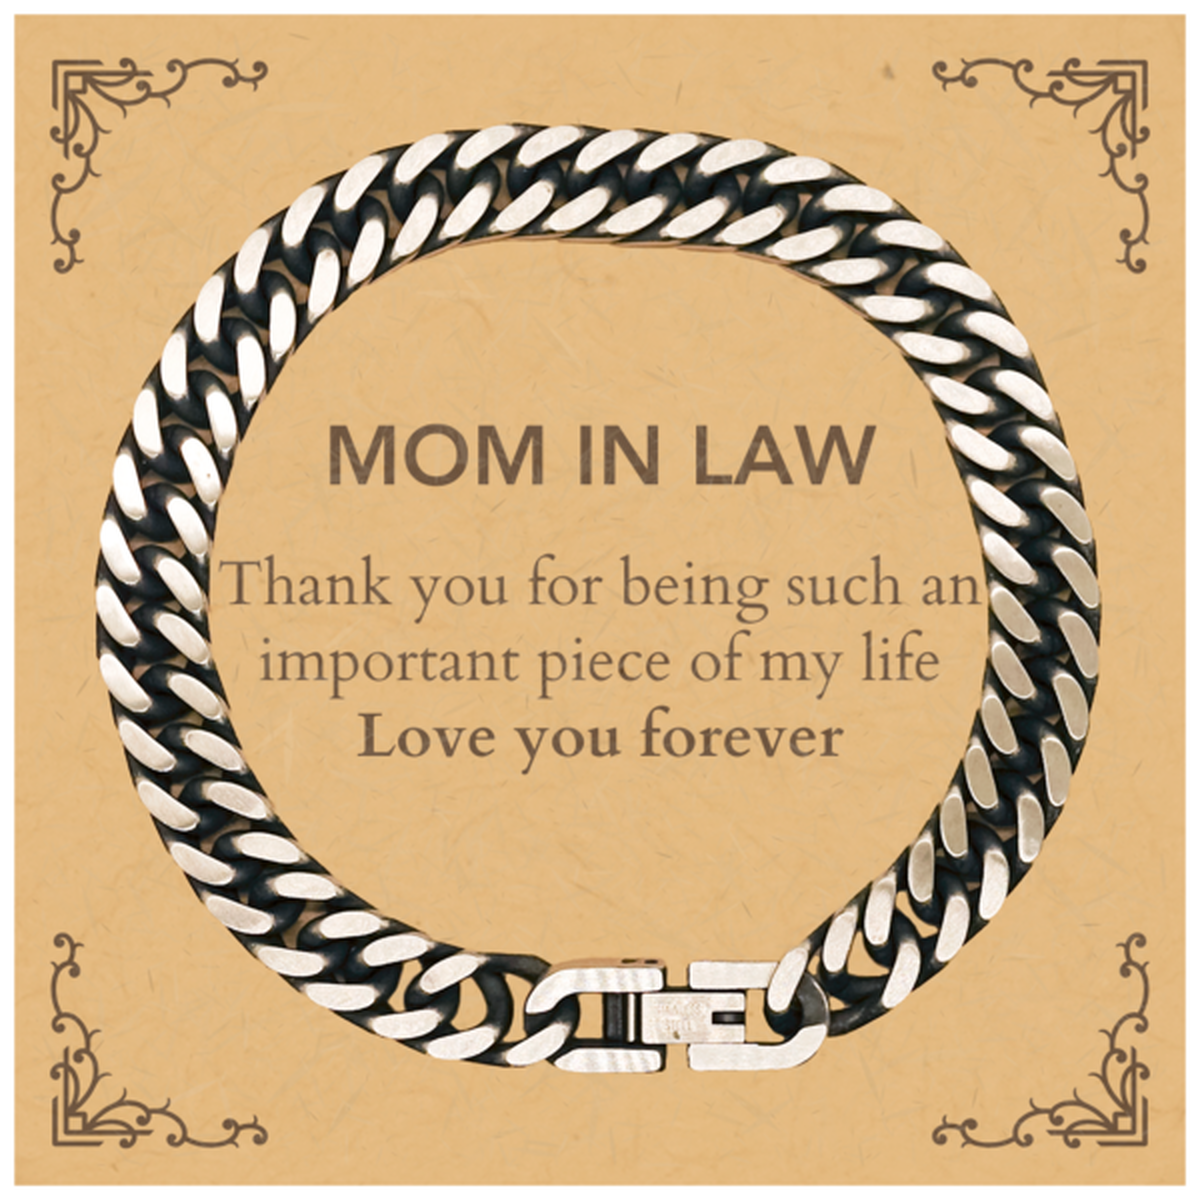 Appropriate Mom In Law Cuban Link Chain Bracelet Epic Birthday Gifts for Mom In Law Thank you for being such an important piece of my life Mom In Law Christmas Mothers Fathers Day